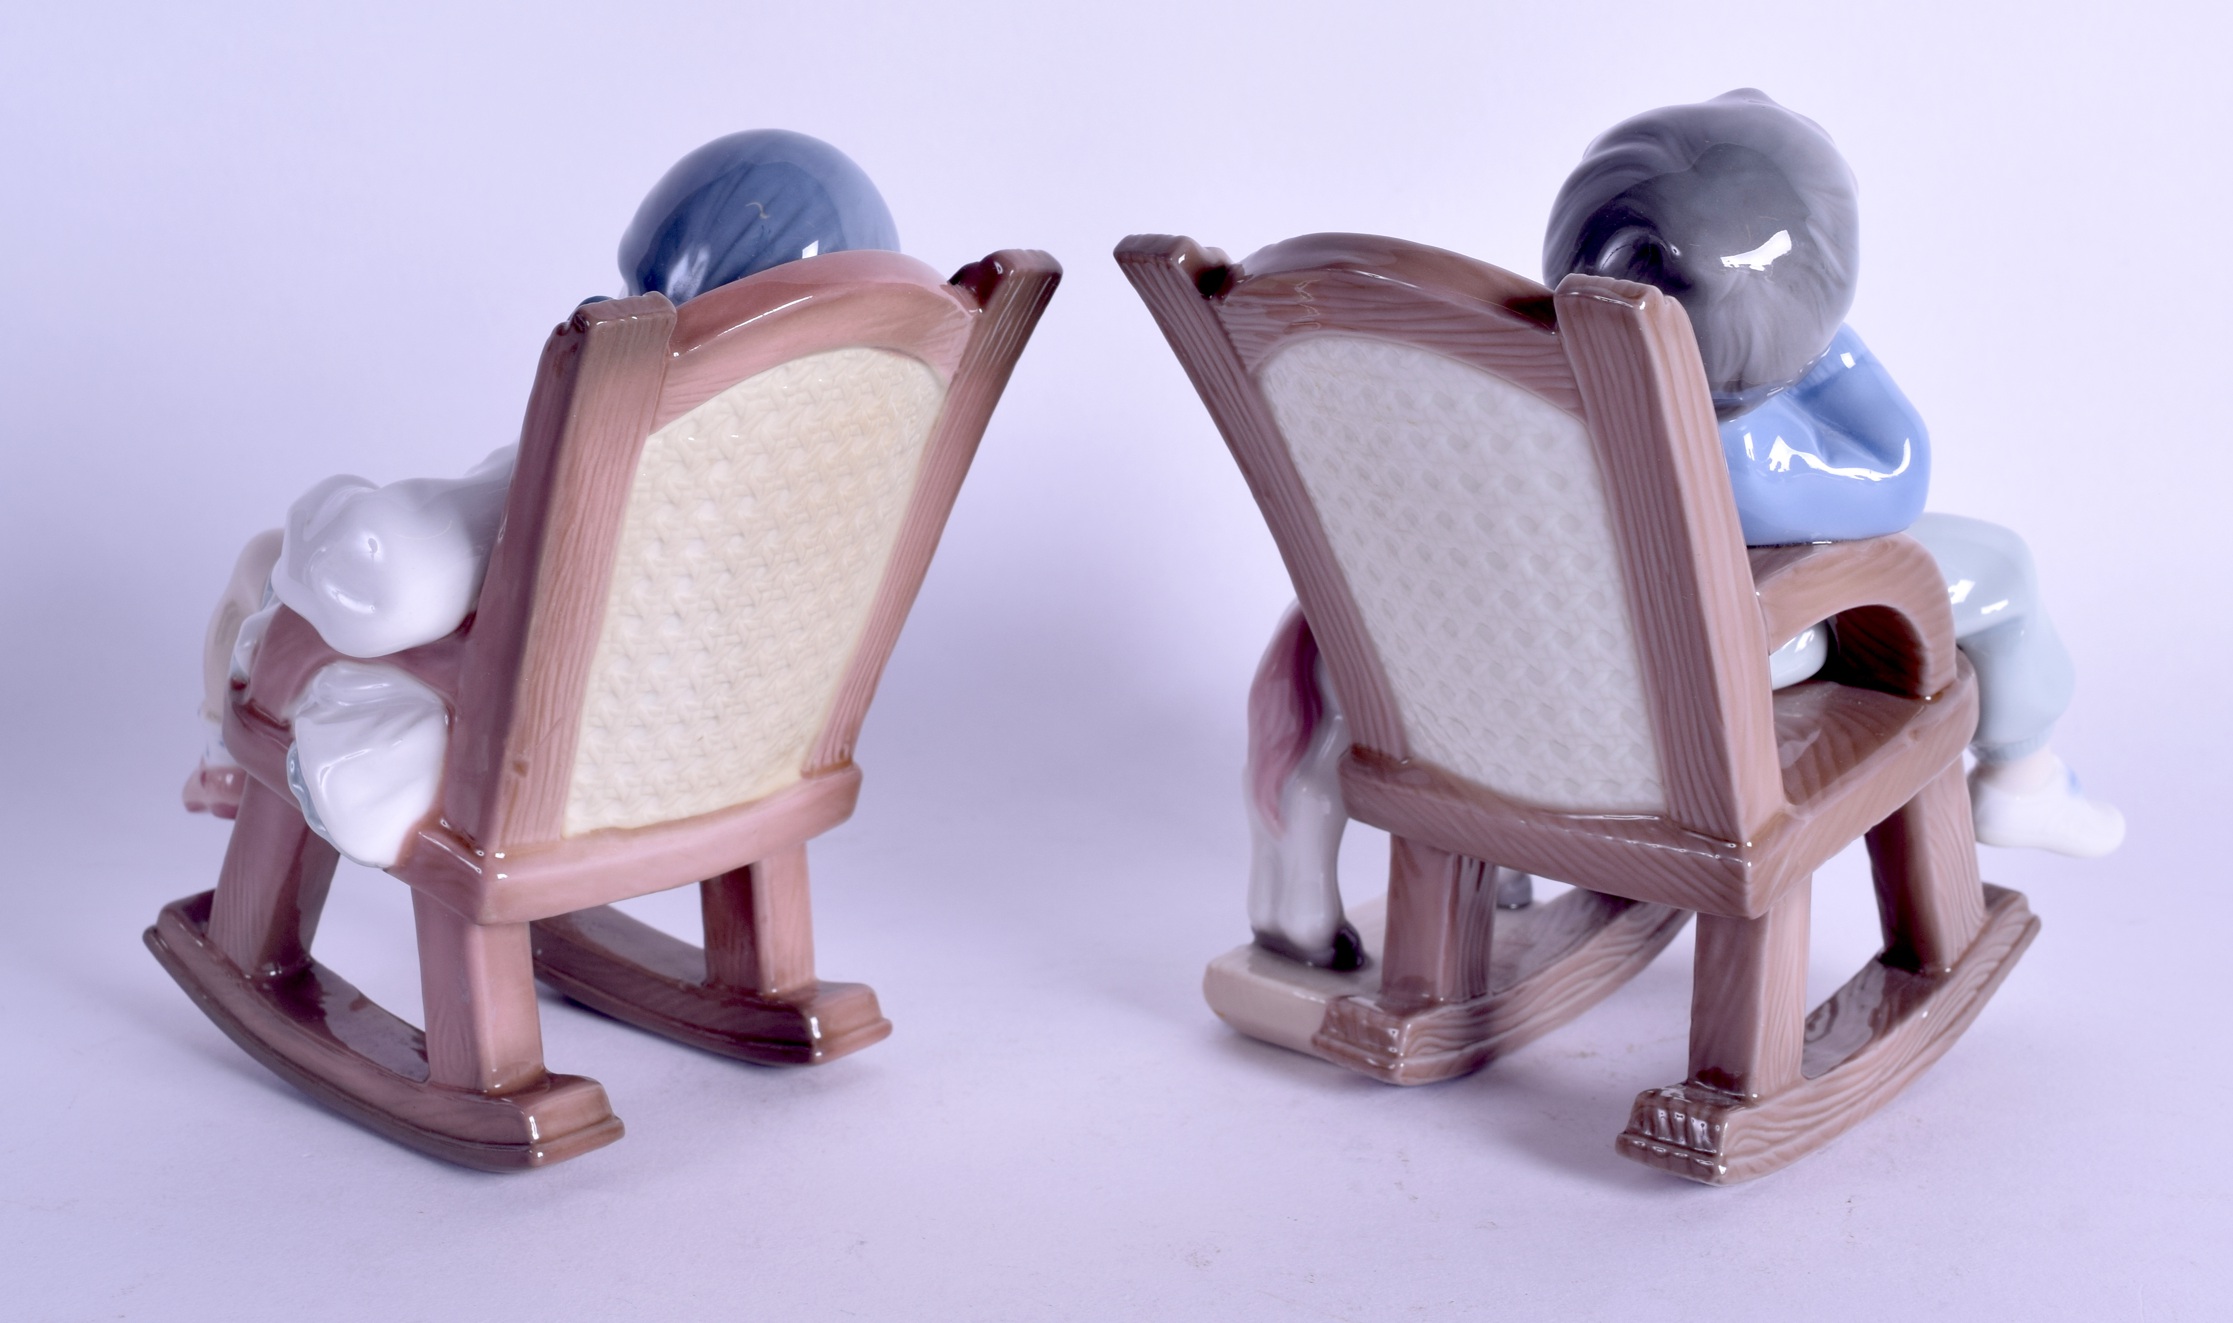 A PAIR OF LLADRO PORCELAIN FIGURES OF SLEEPING CHILDREN modelled upon chairs. 14 cm high. - Image 2 of 3